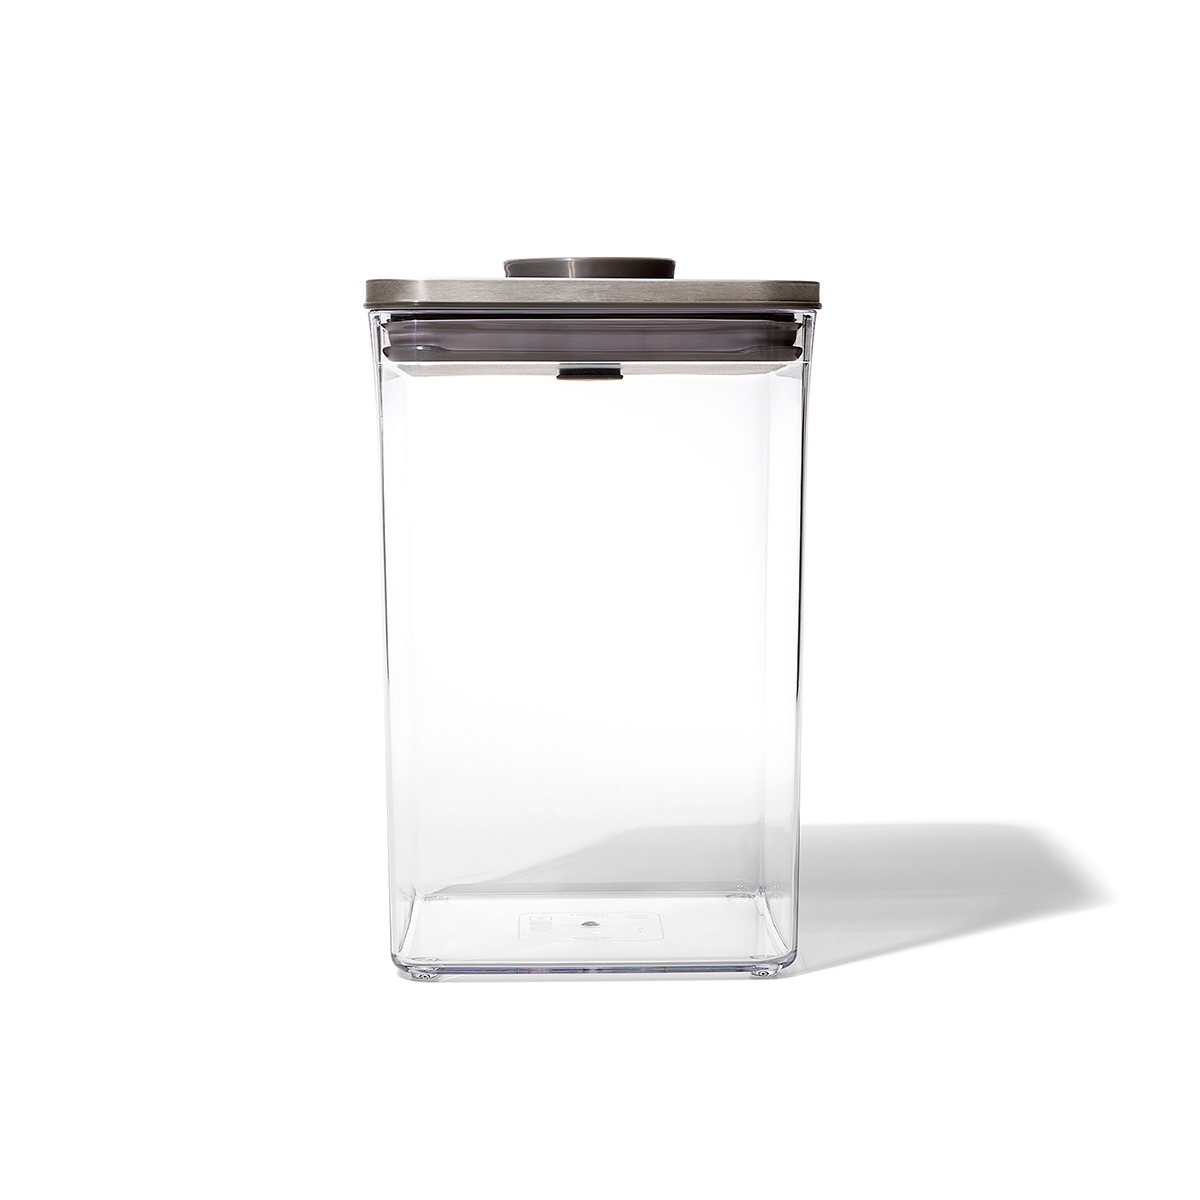 OXO SoftWorks Big Square POP Container, 4.3 qt - Food 4 Less